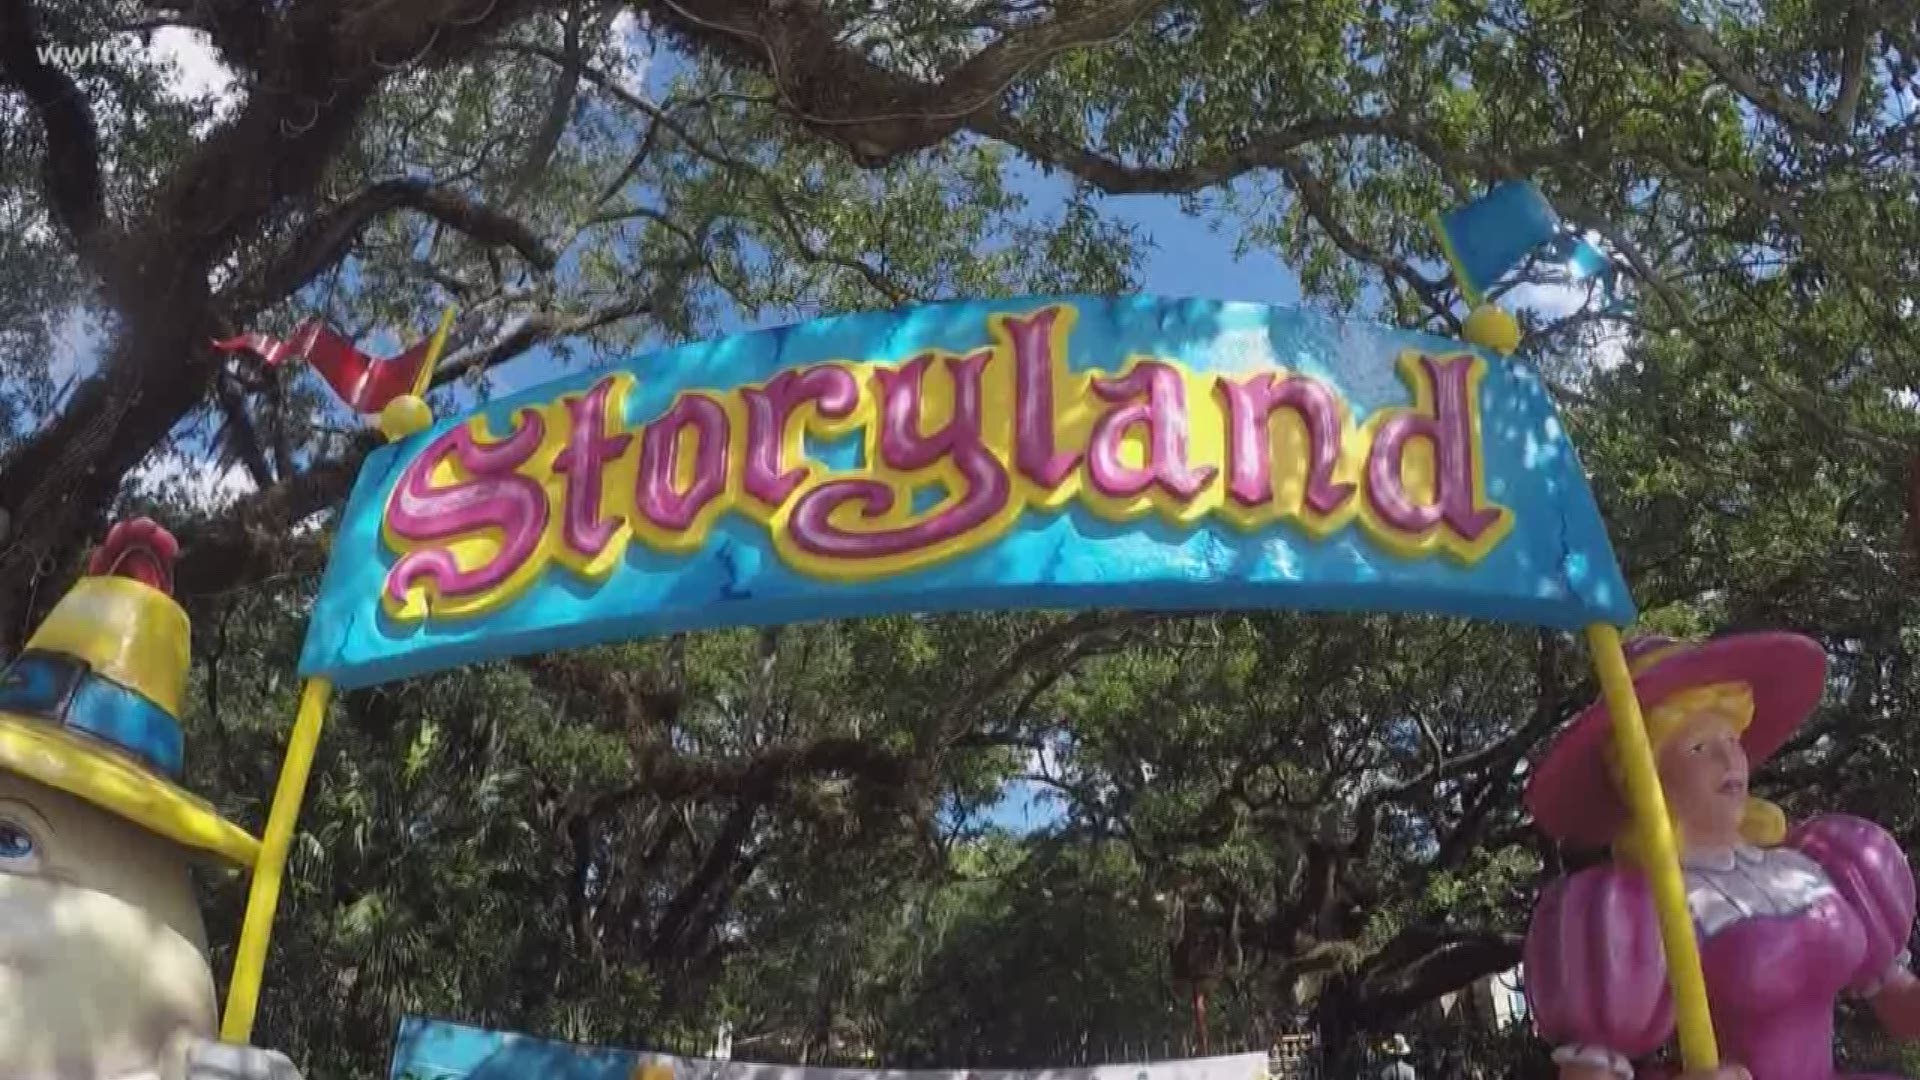 Storyland, new and improved, opens in City Park with STEM in mind